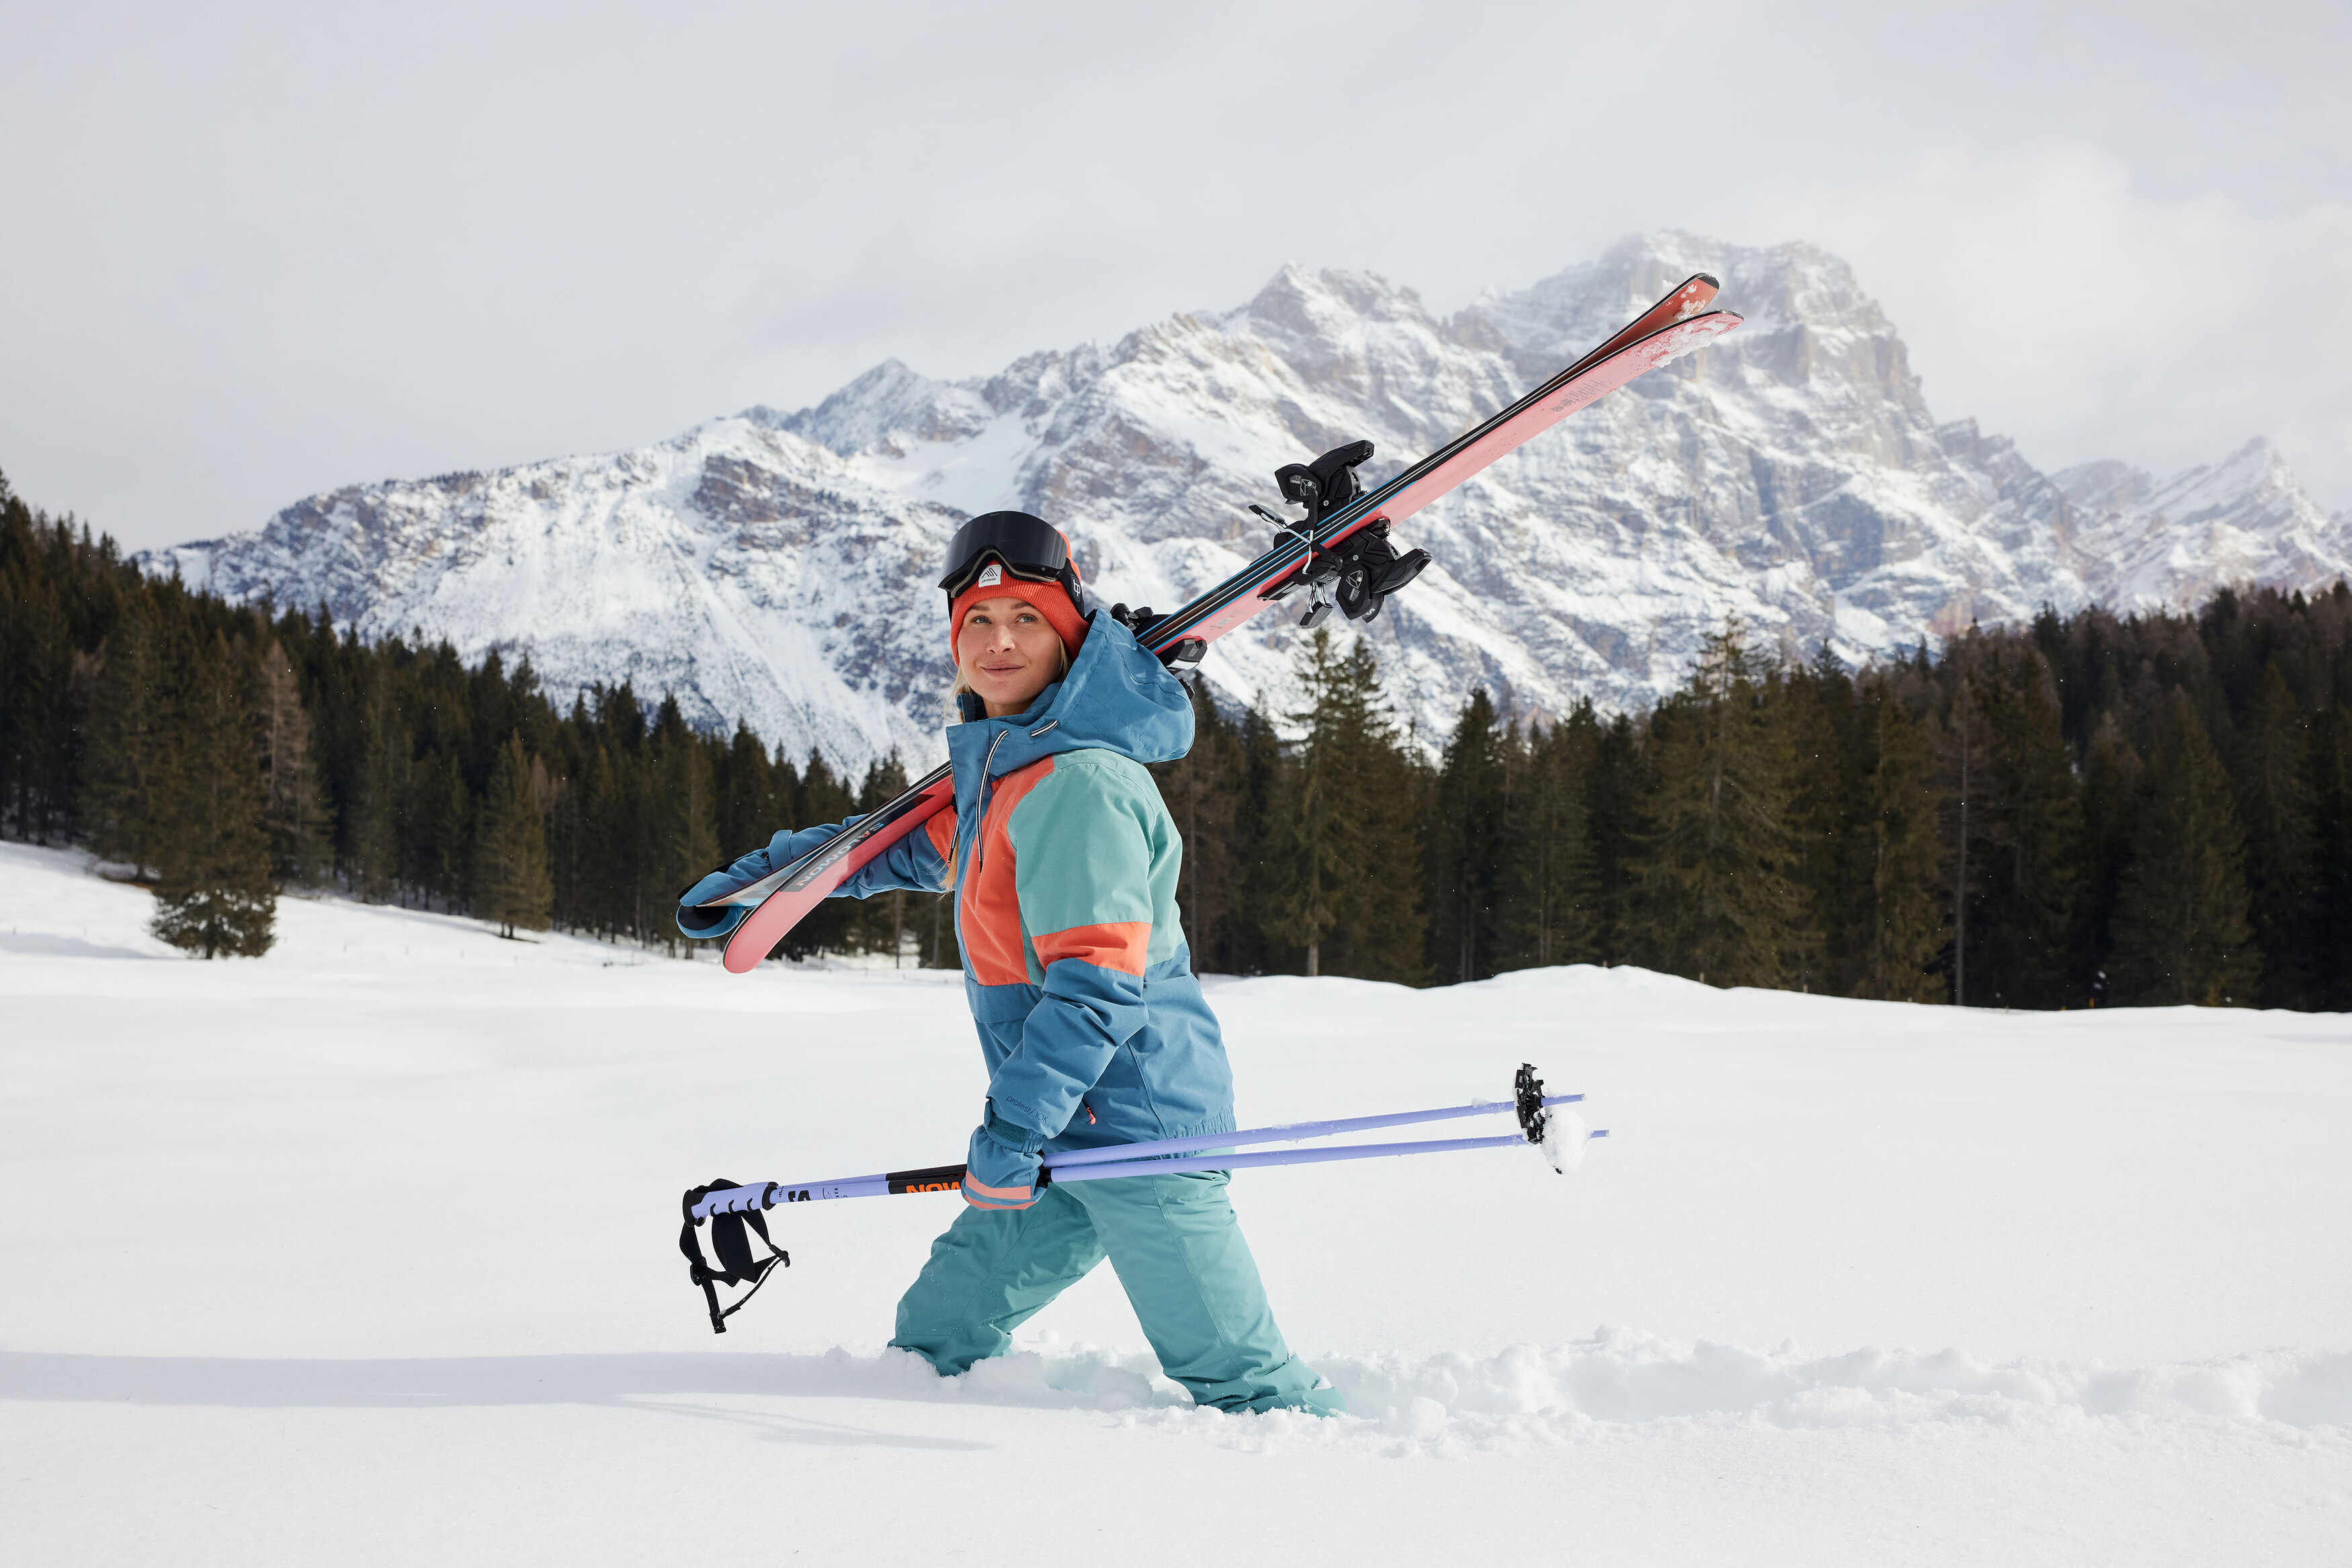 The women's ski clothing trends of 2023-2024